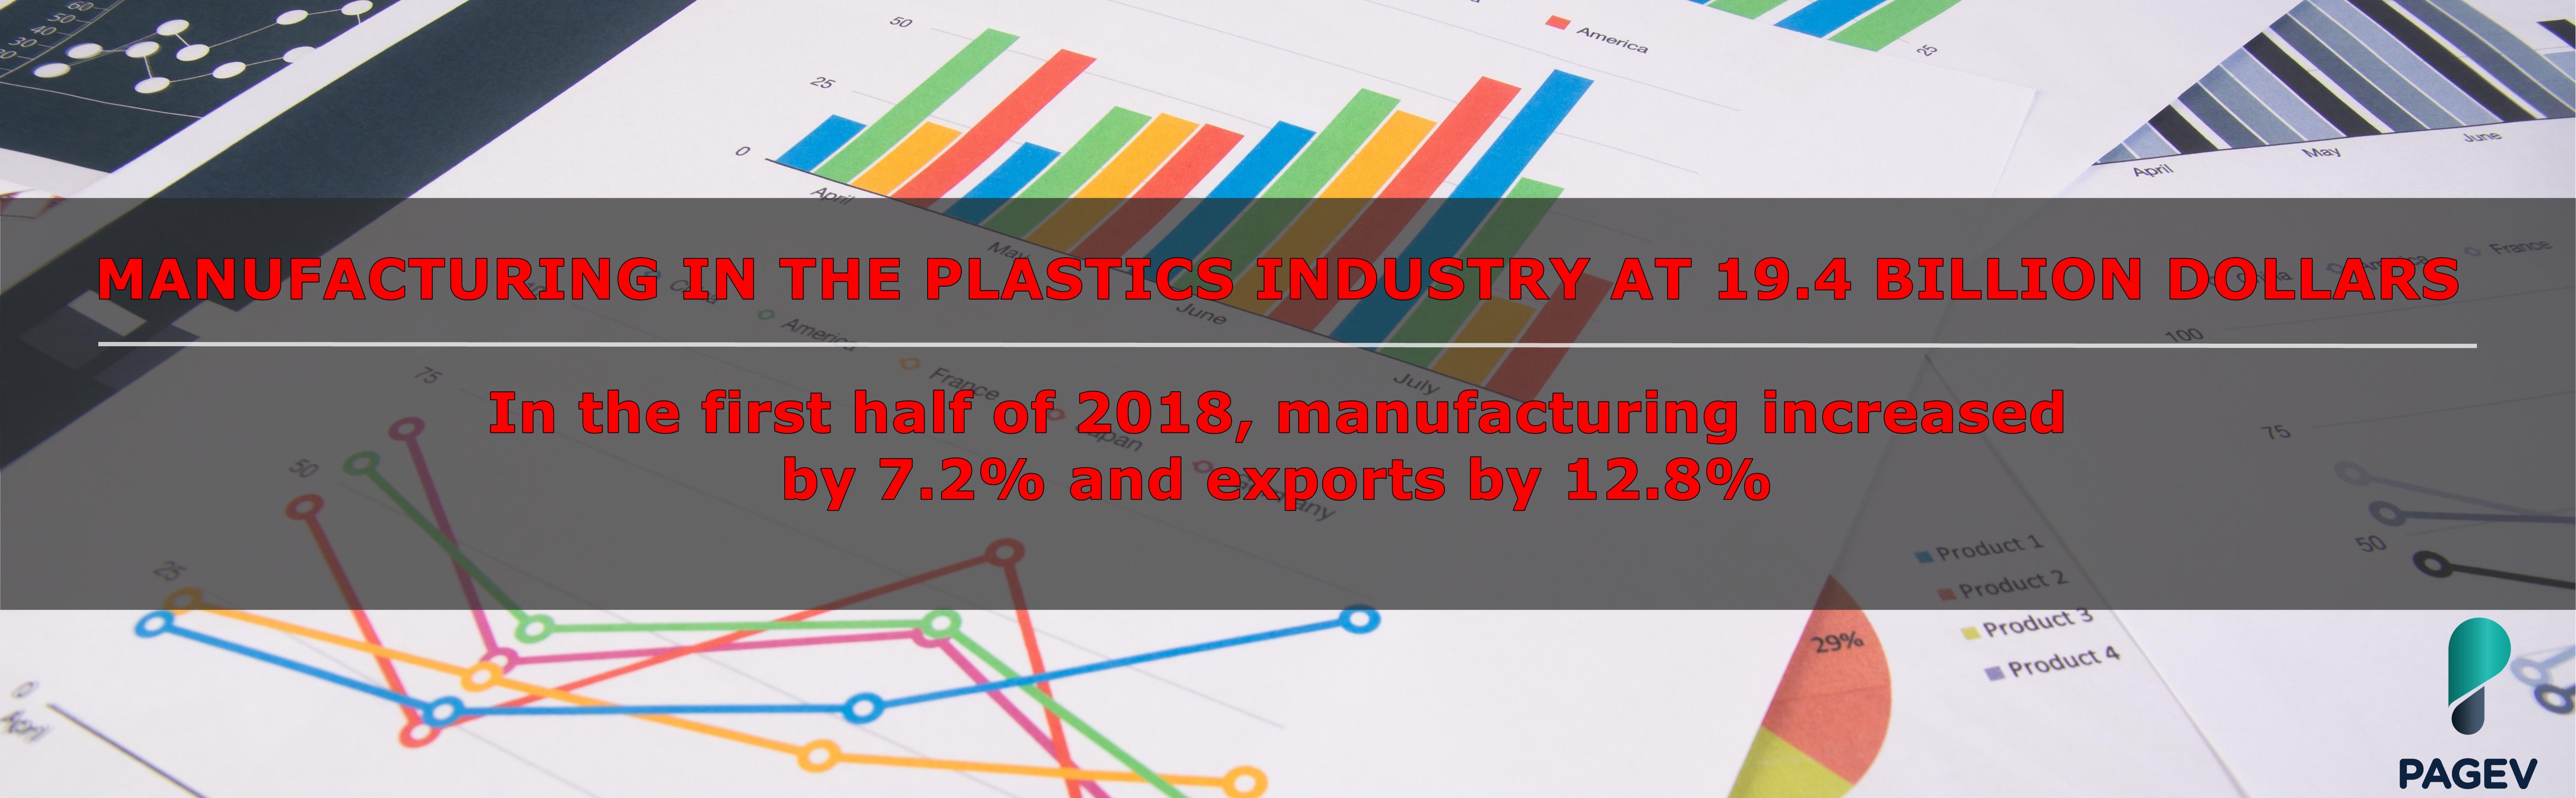 MANUFACTURING IN THE PLASTICS INDUSTRY AT 19.4 BILLION DOLLARS